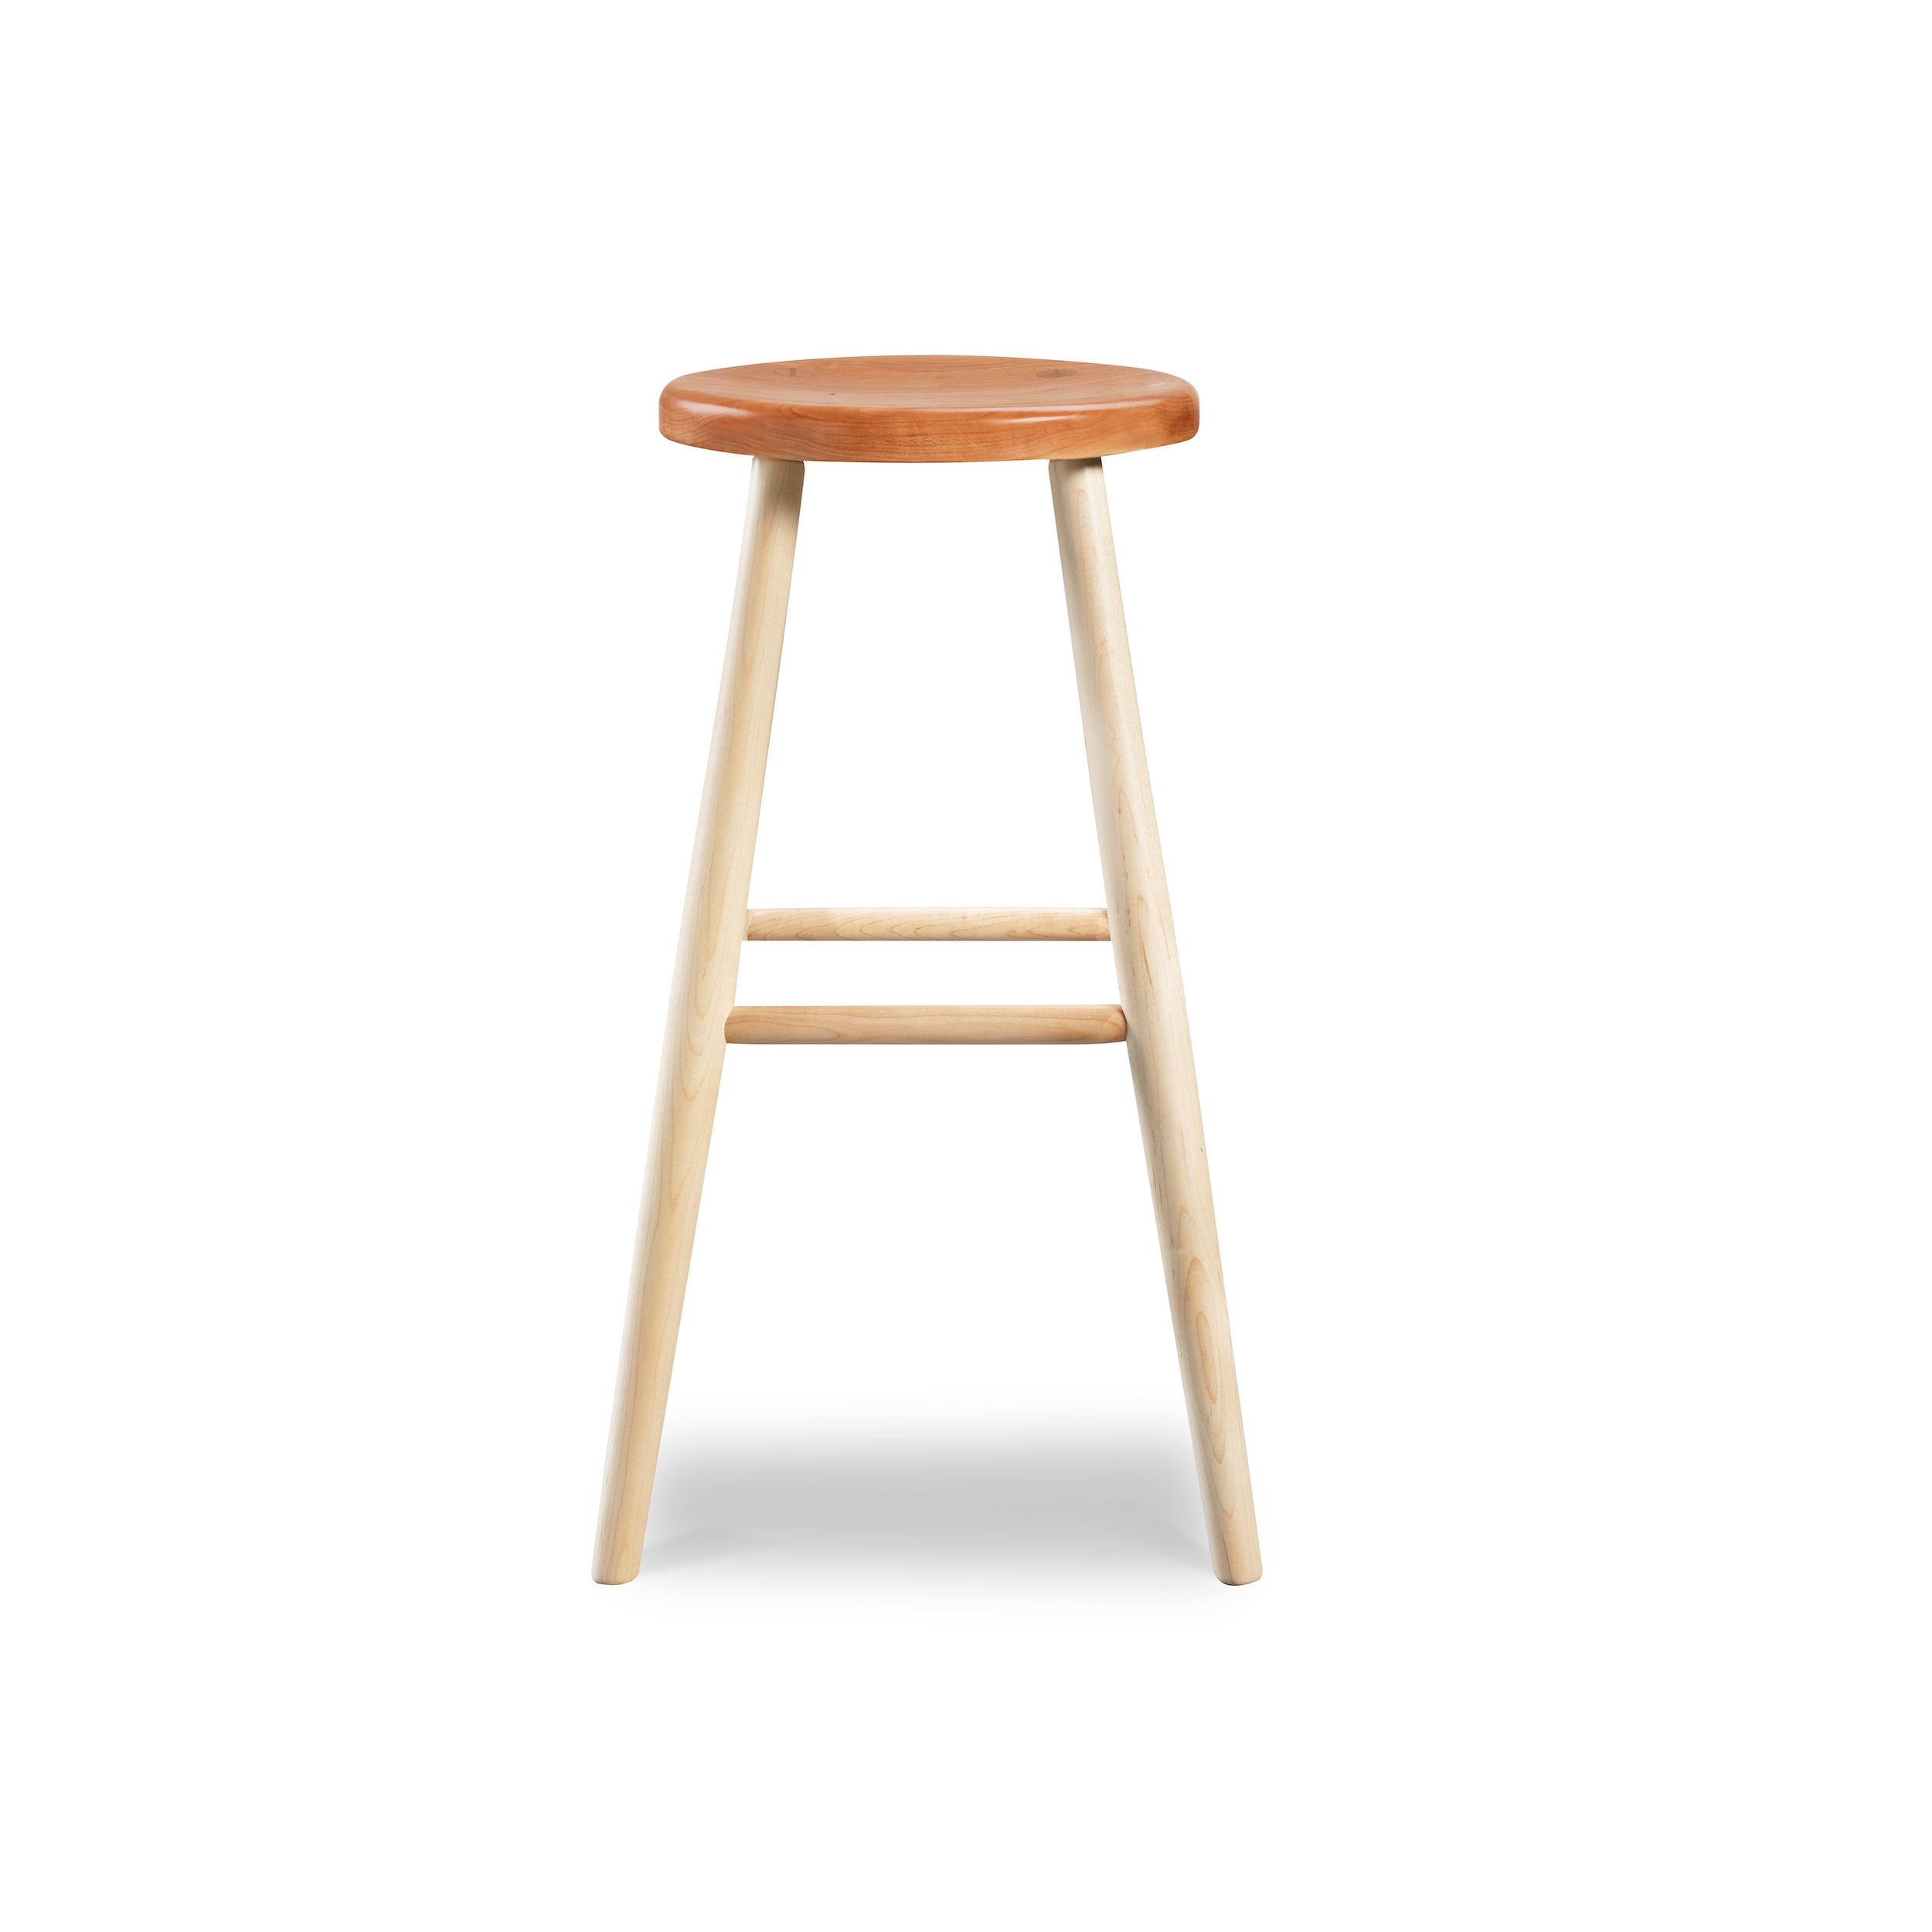 Hancock Stool from Chilton Furniture in cherry and maple wood